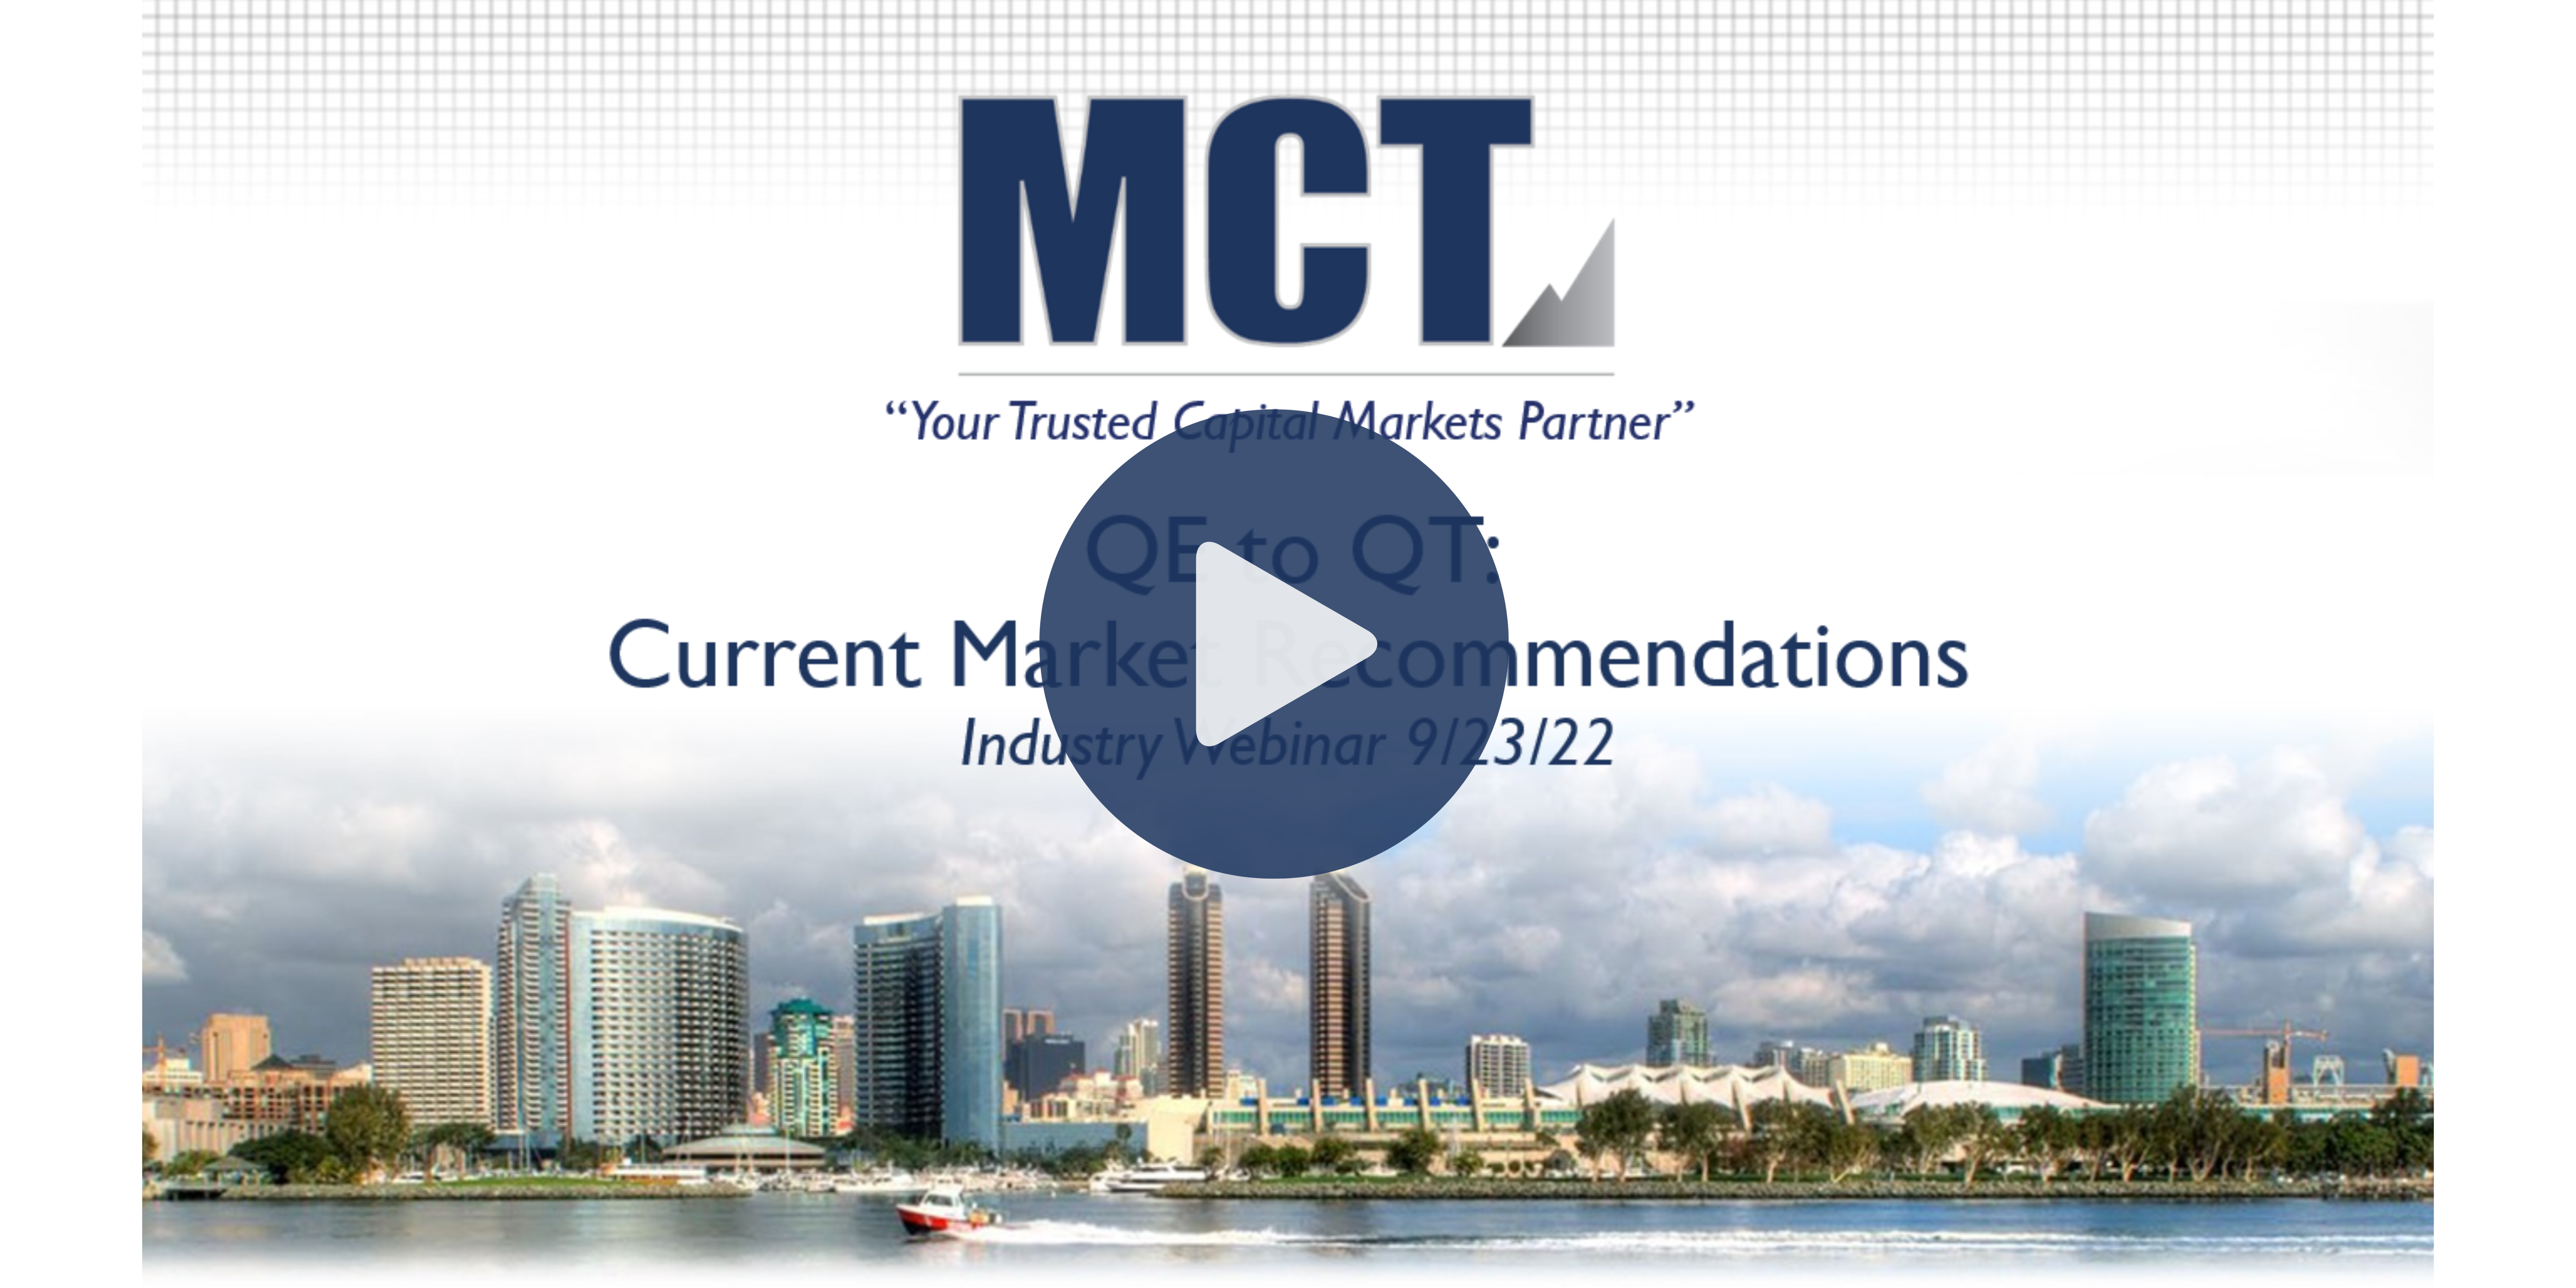 QE to QT: Current Market Recommendations [MCT Industry Webinar]